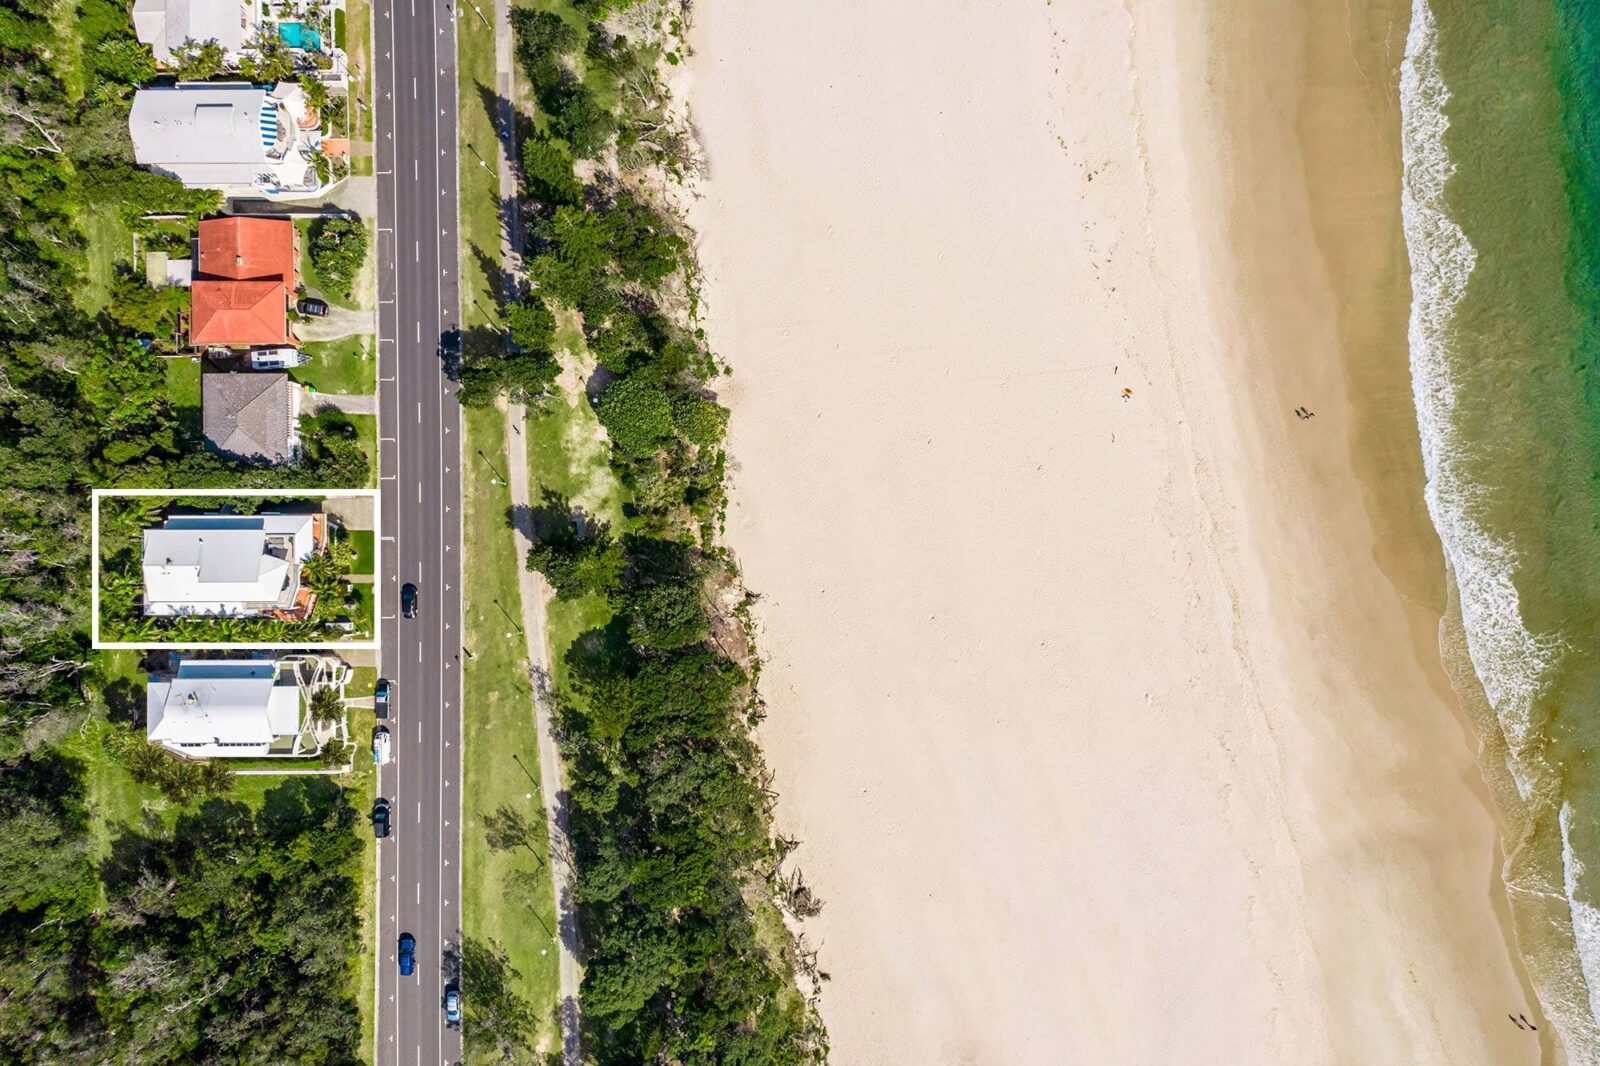 Apartment-2-Surfside-Byron-Bay-Aerial-View-Street-and-Beach